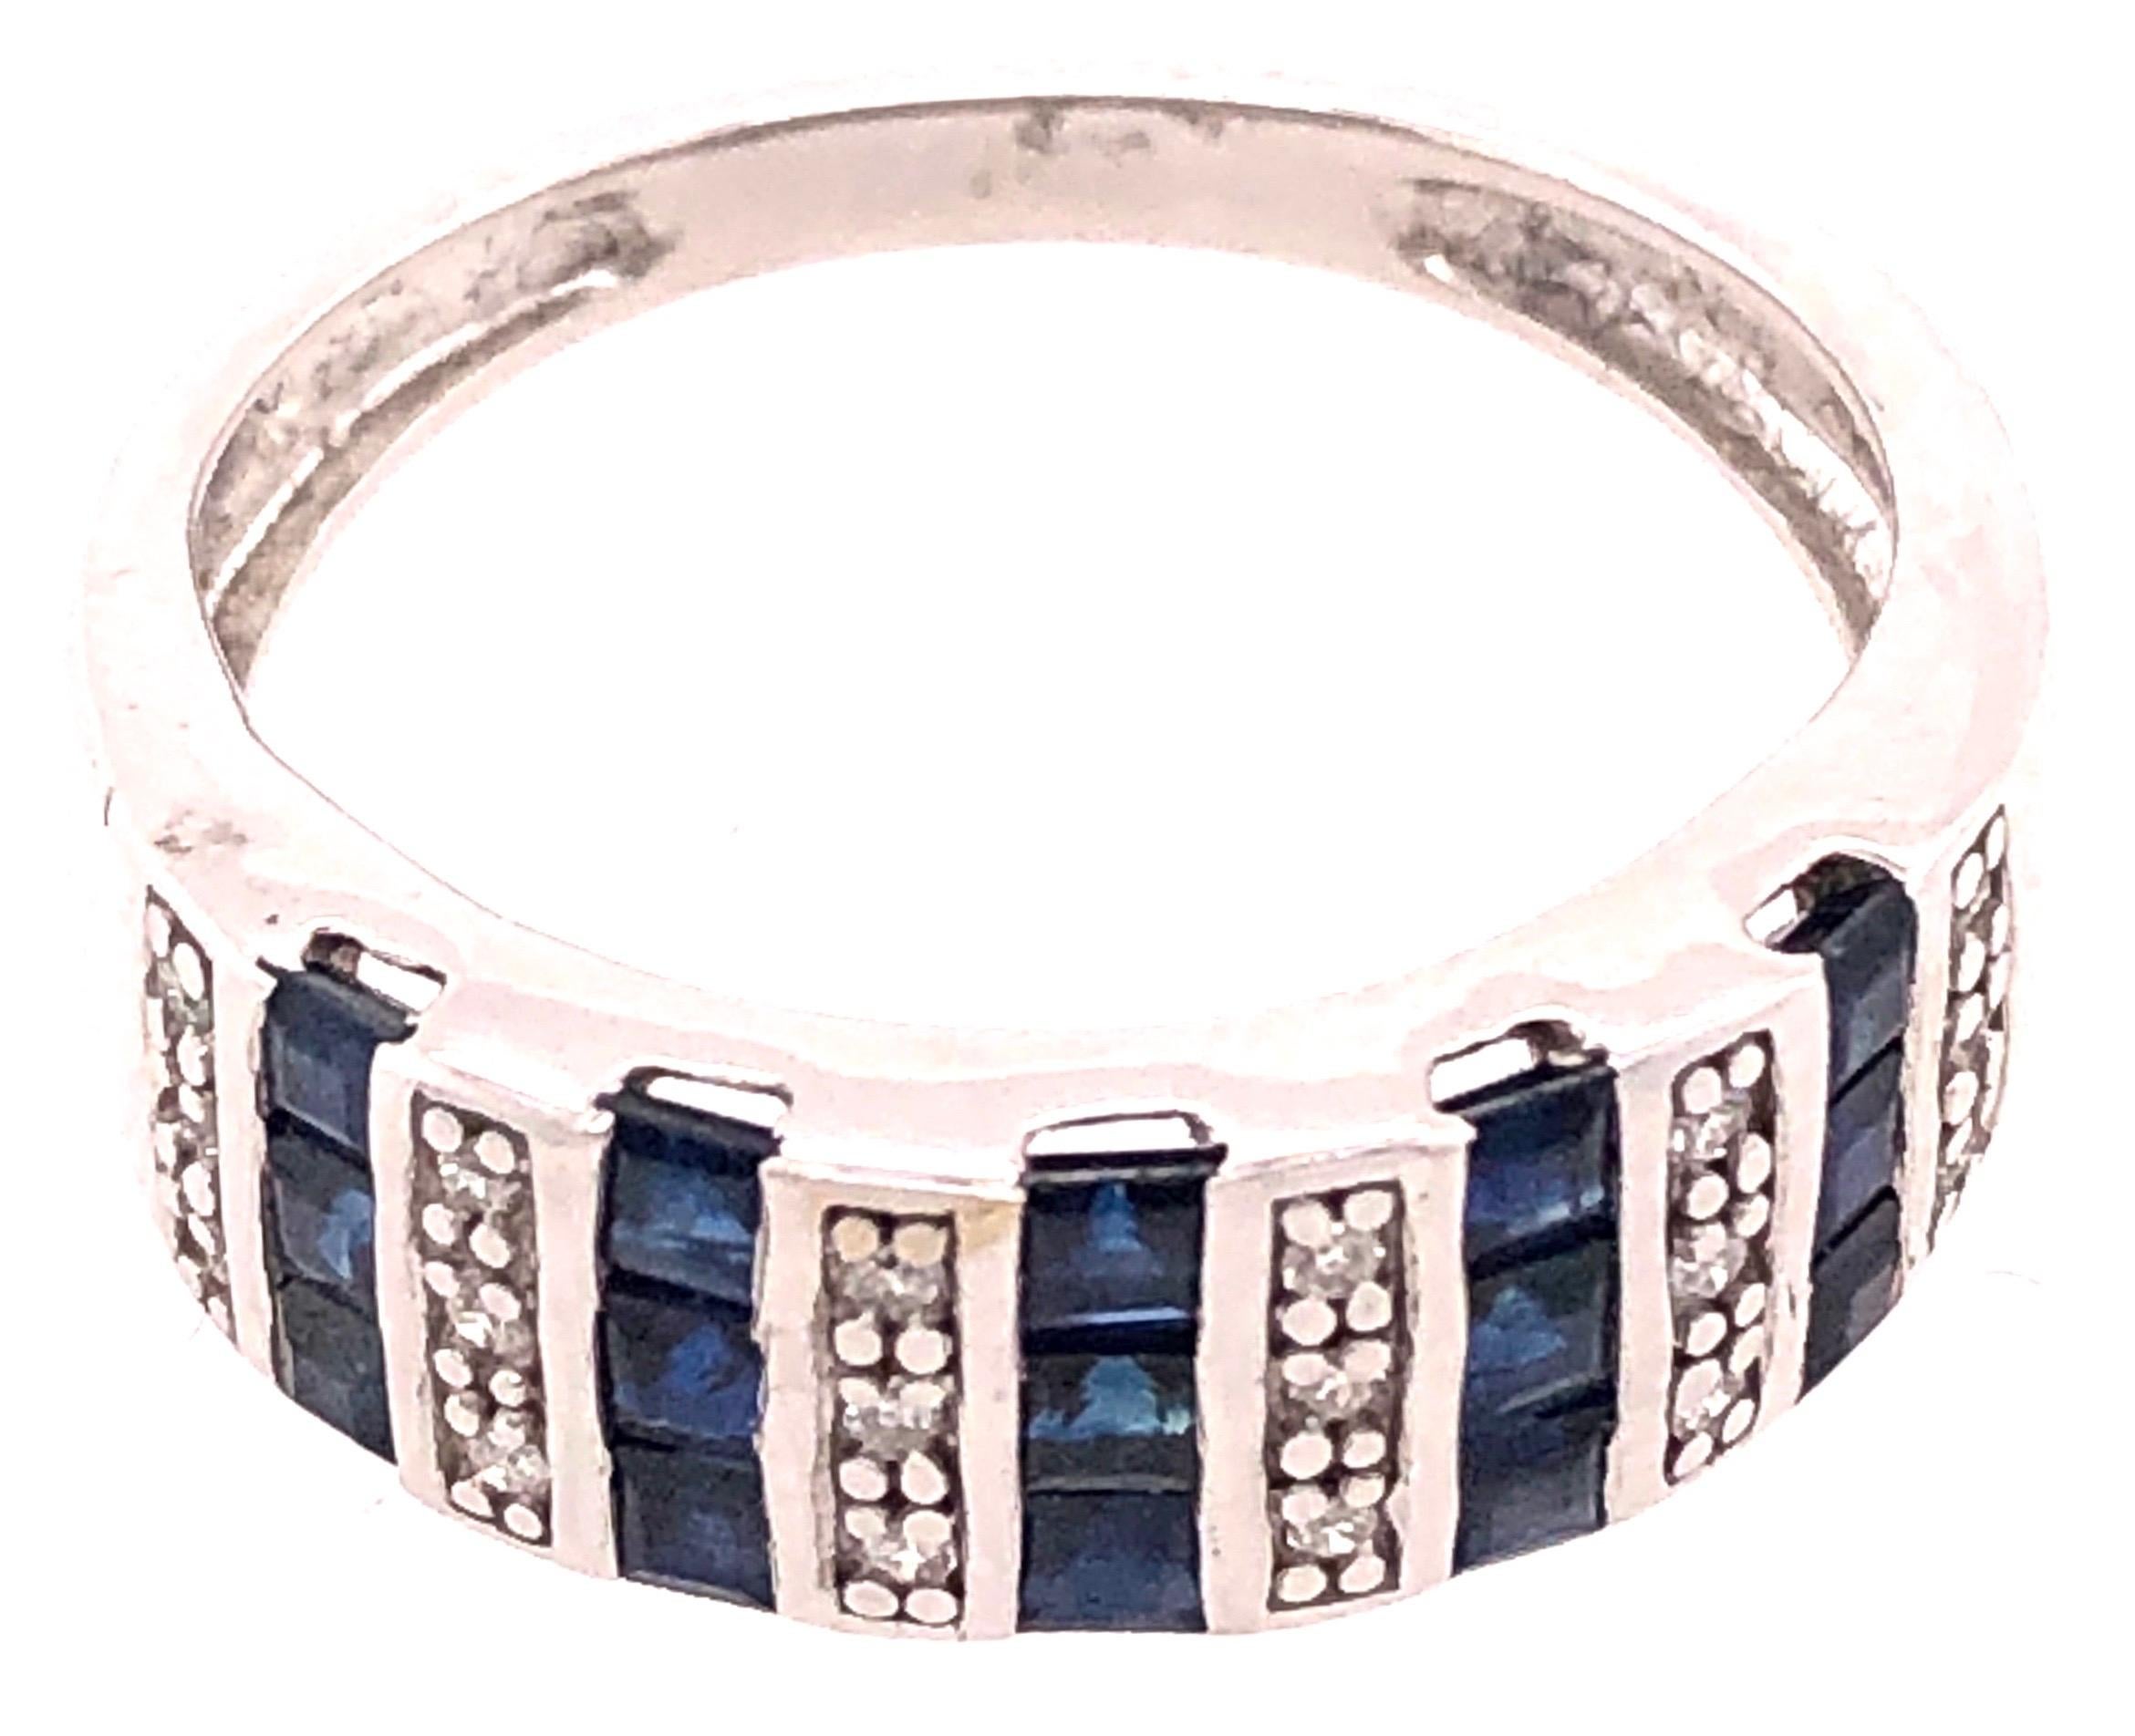 14 Karat White Gold Blue Sapphire And Diamond Band Ring
0.18 TDW.
Size 7.25
4 grams total weight.